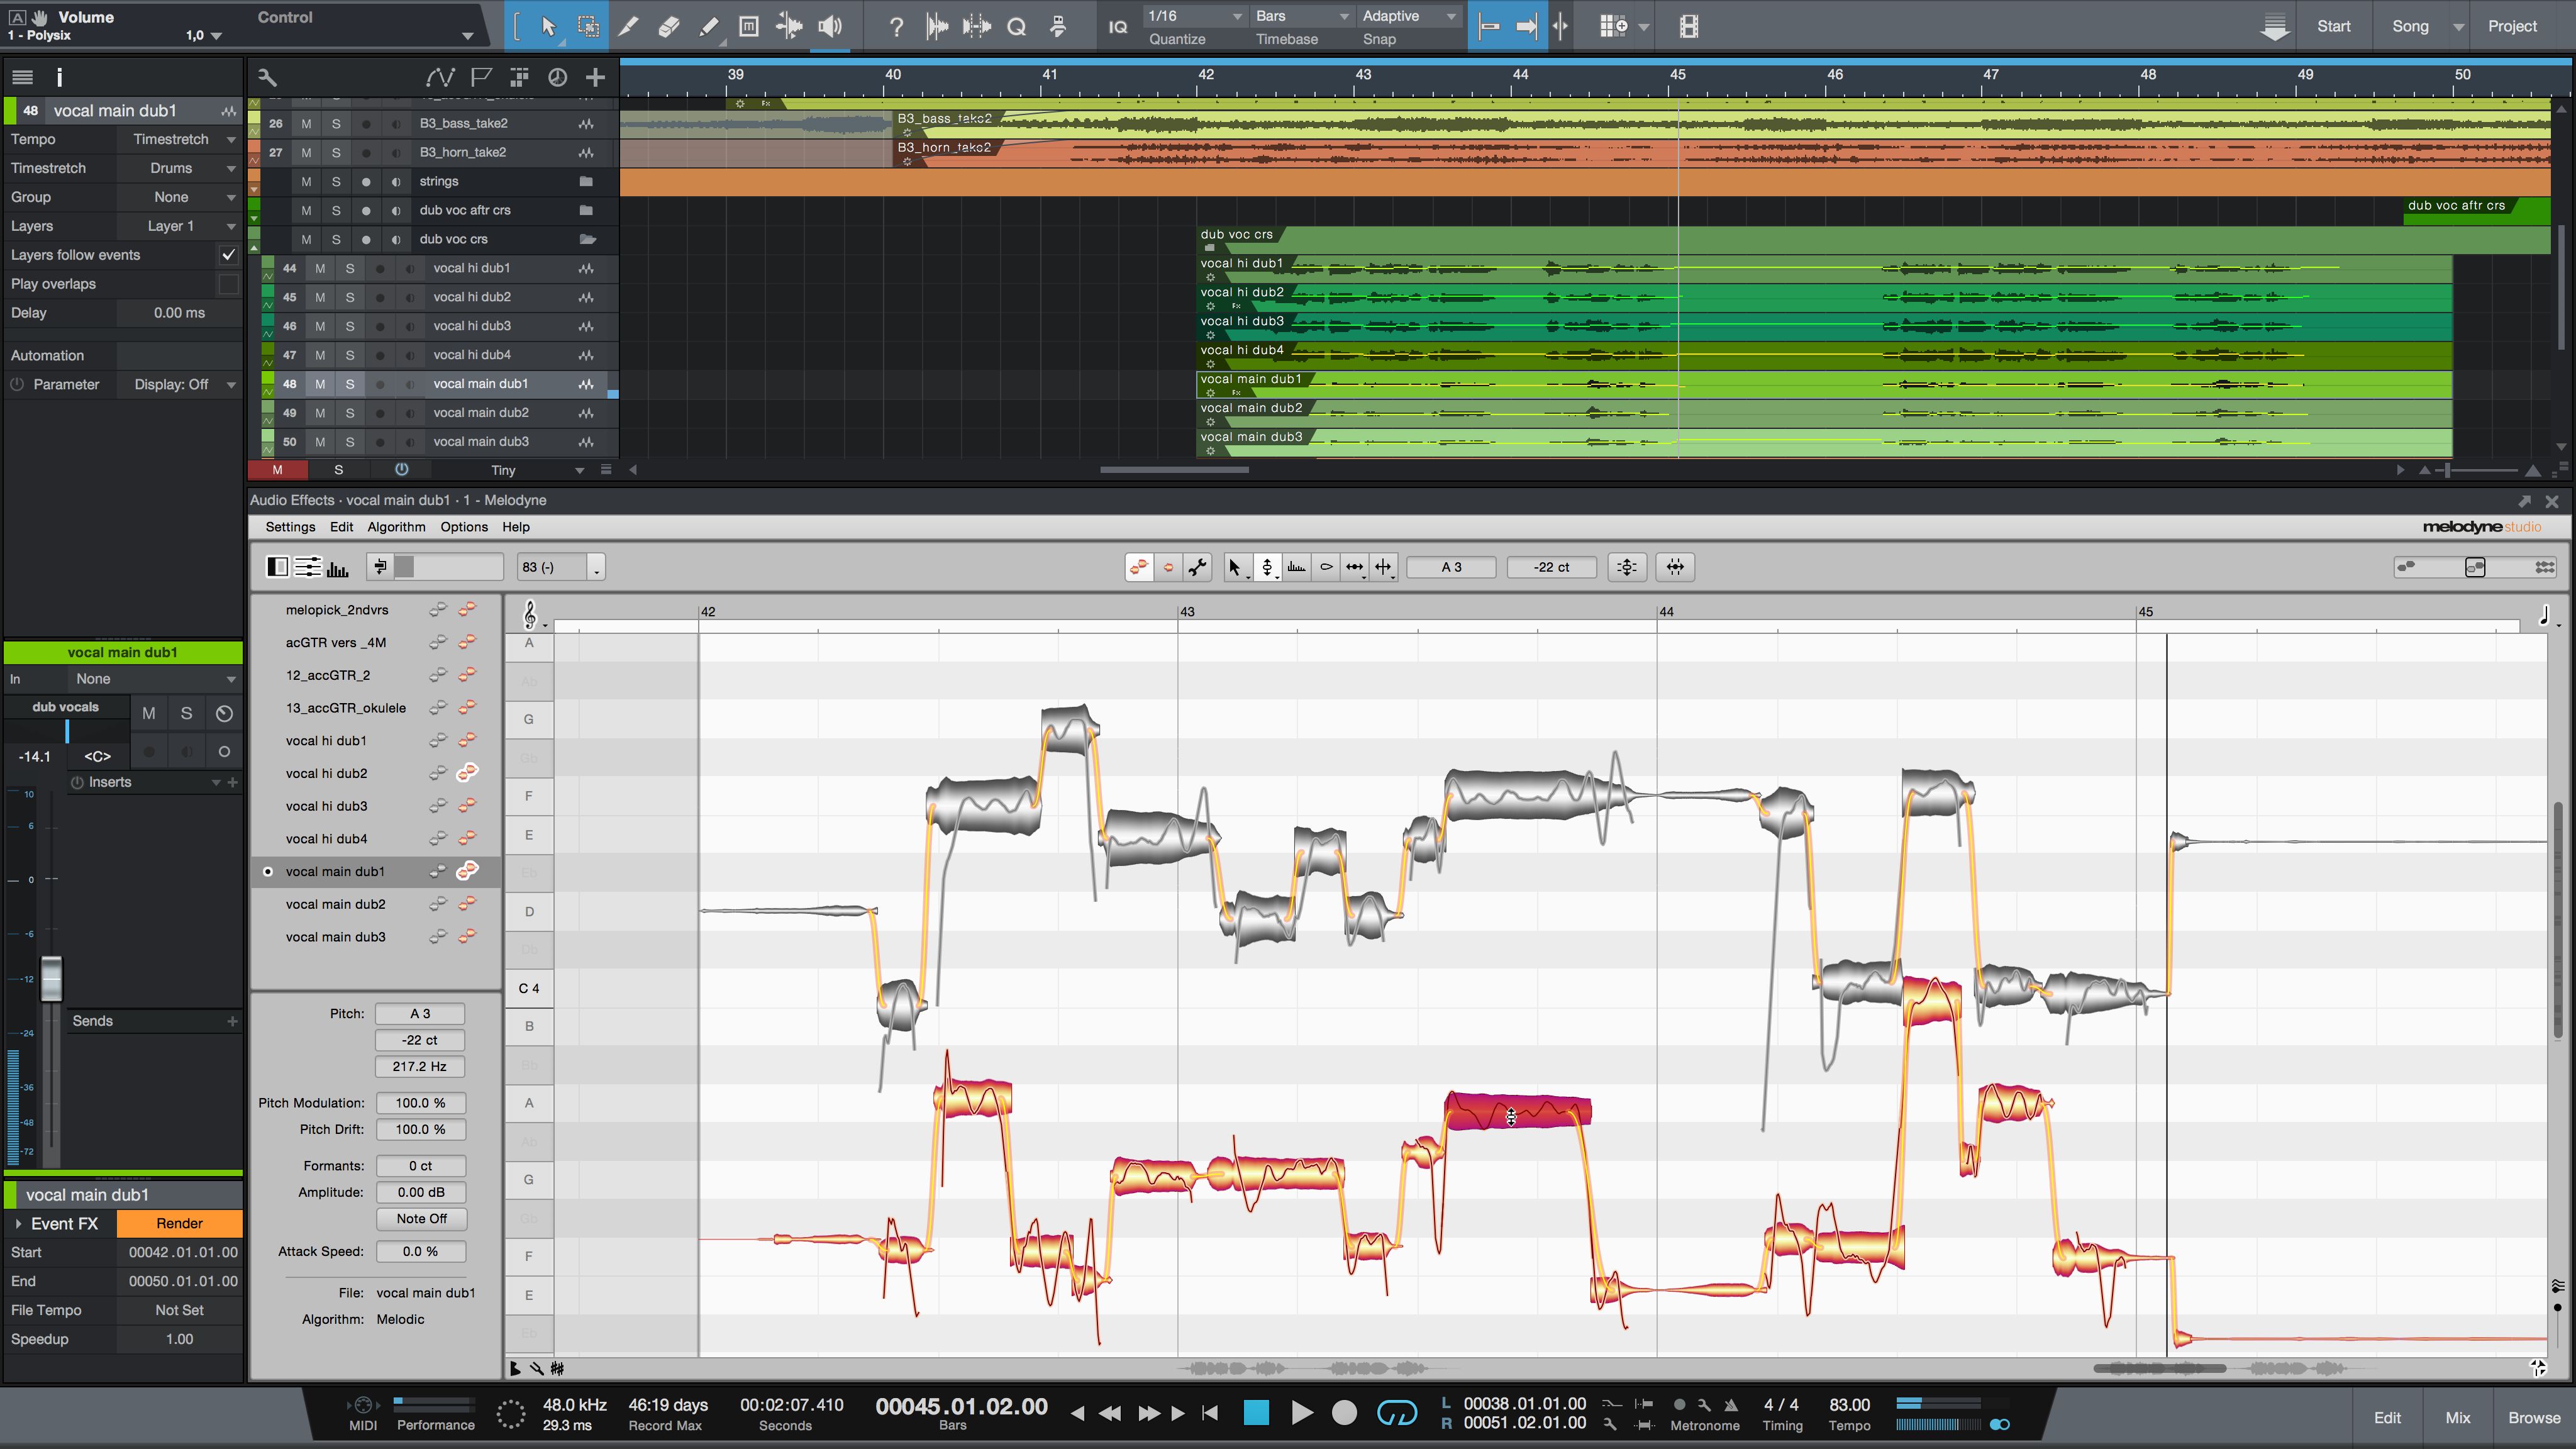 Melodyne 4.1: Even with ARA integration into Studio One, multiple tracks can now be edited simultaneously